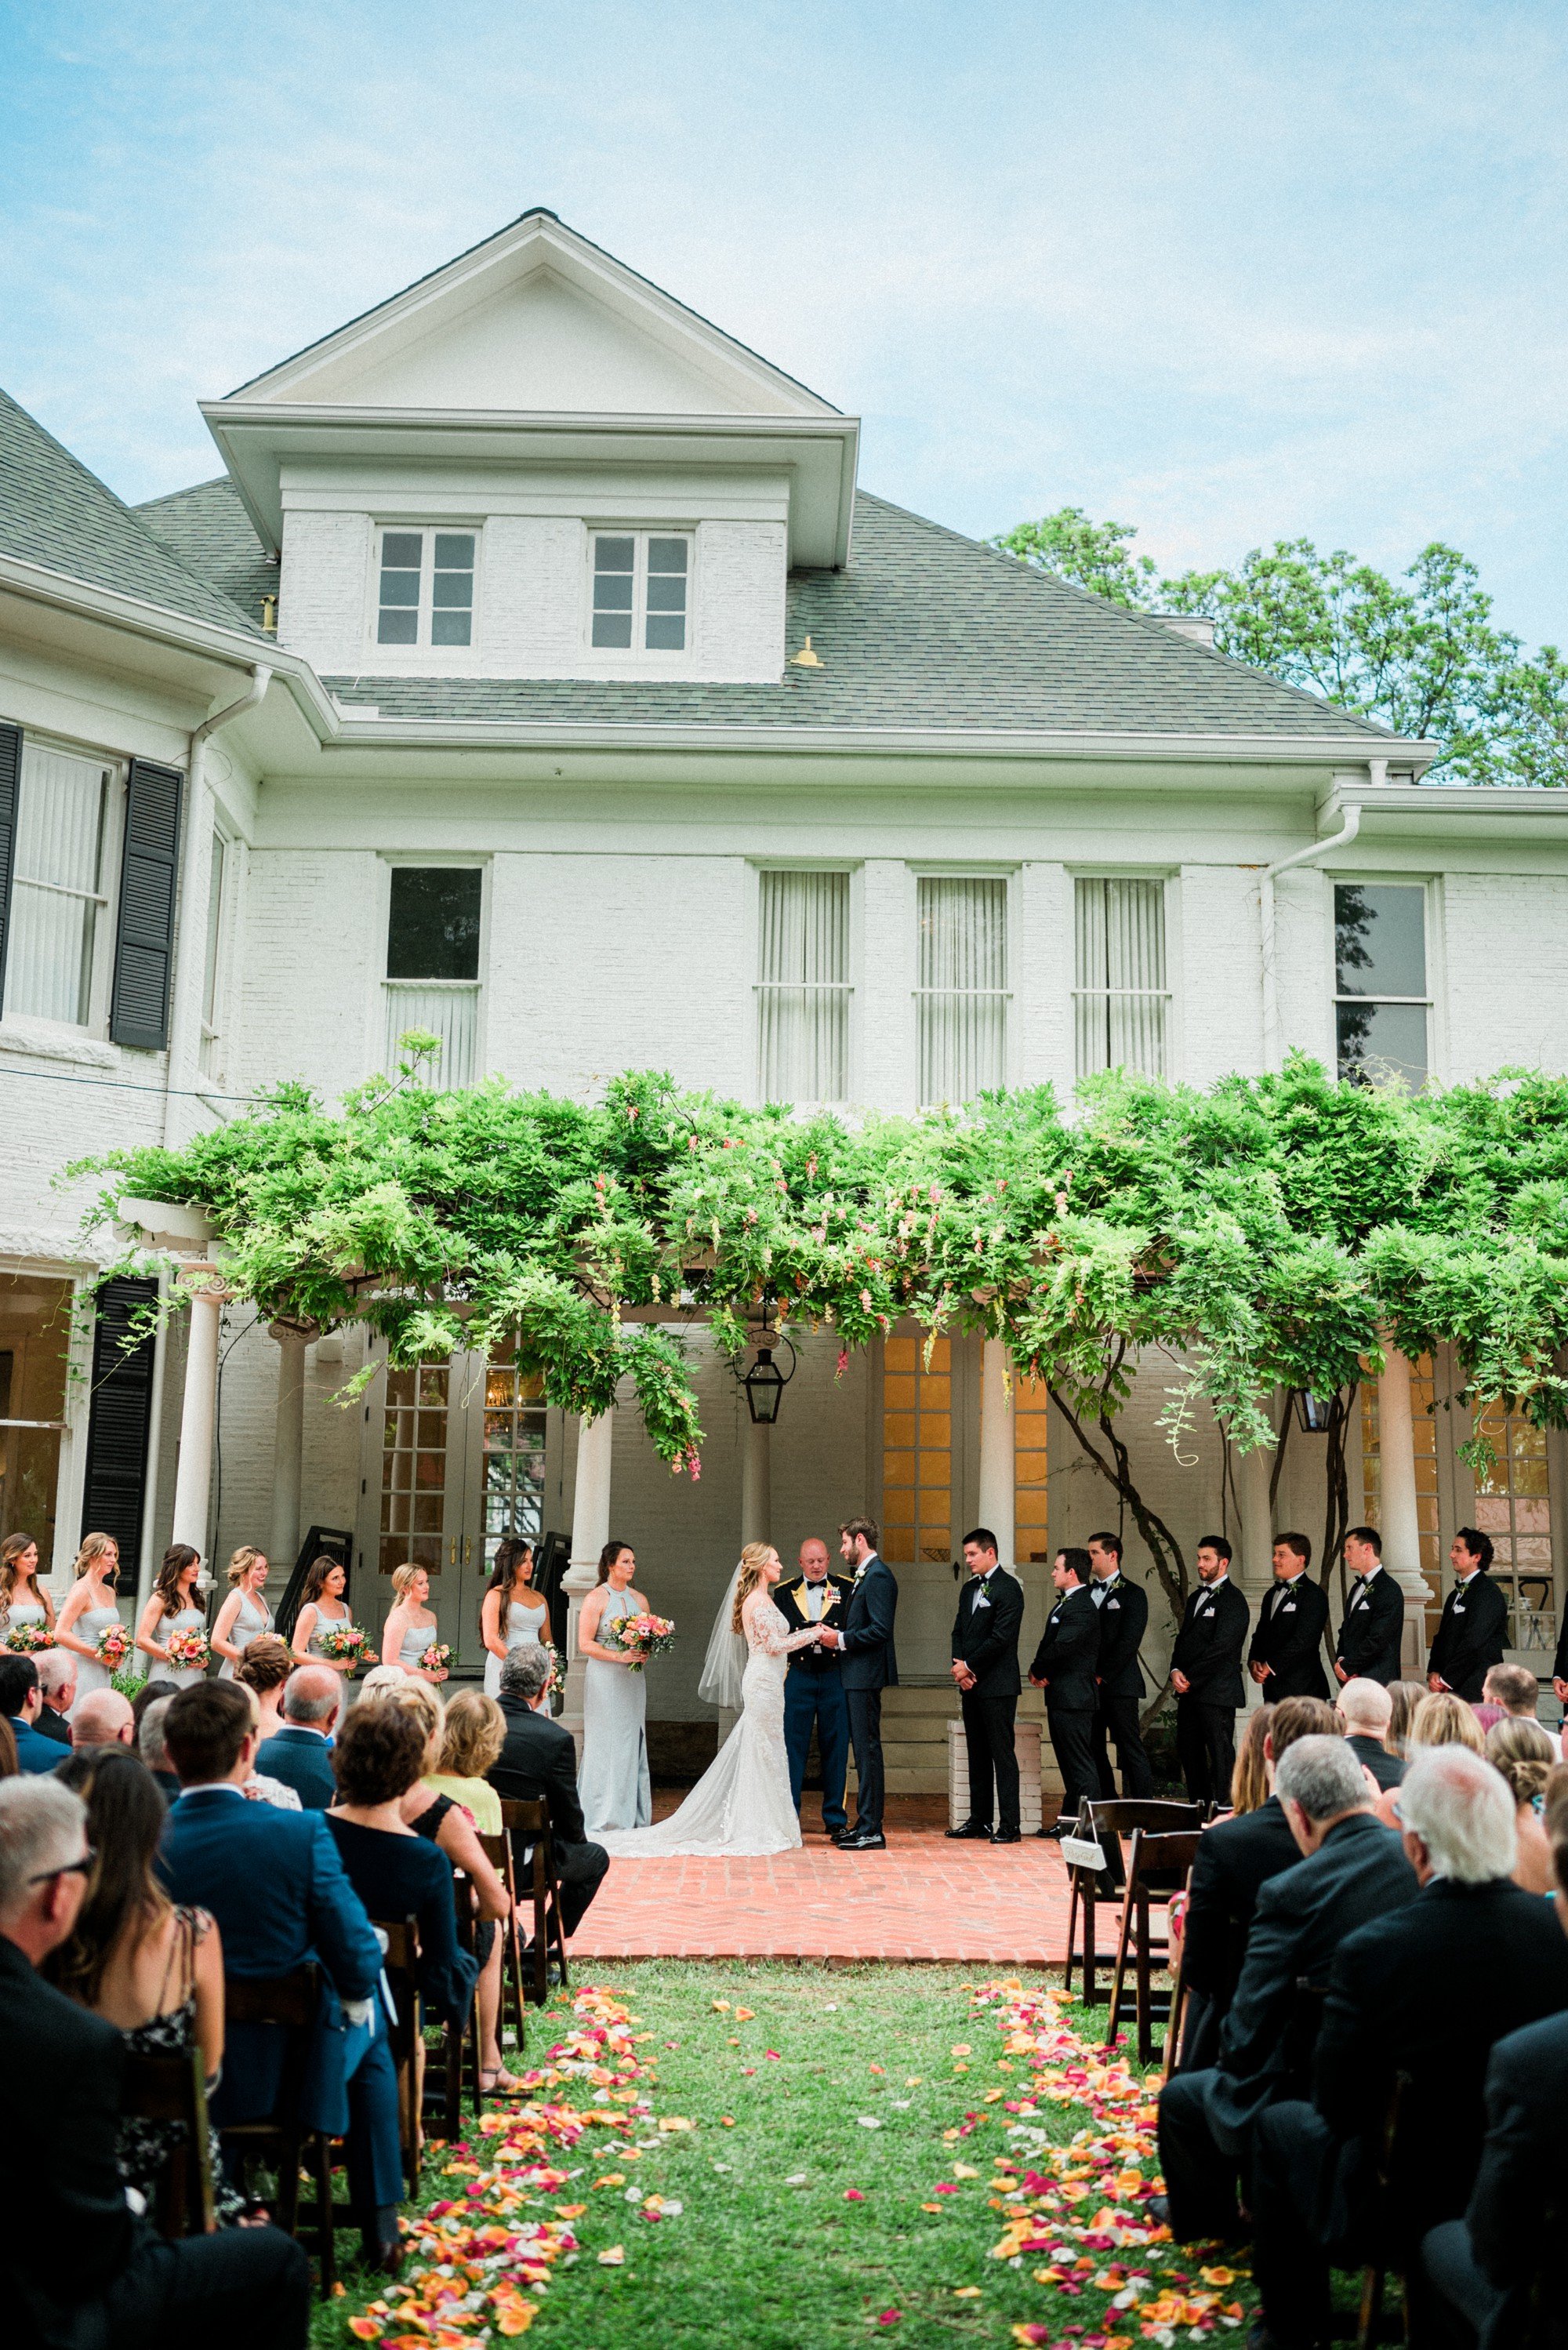 ceremony under an ivy trellis at historic home